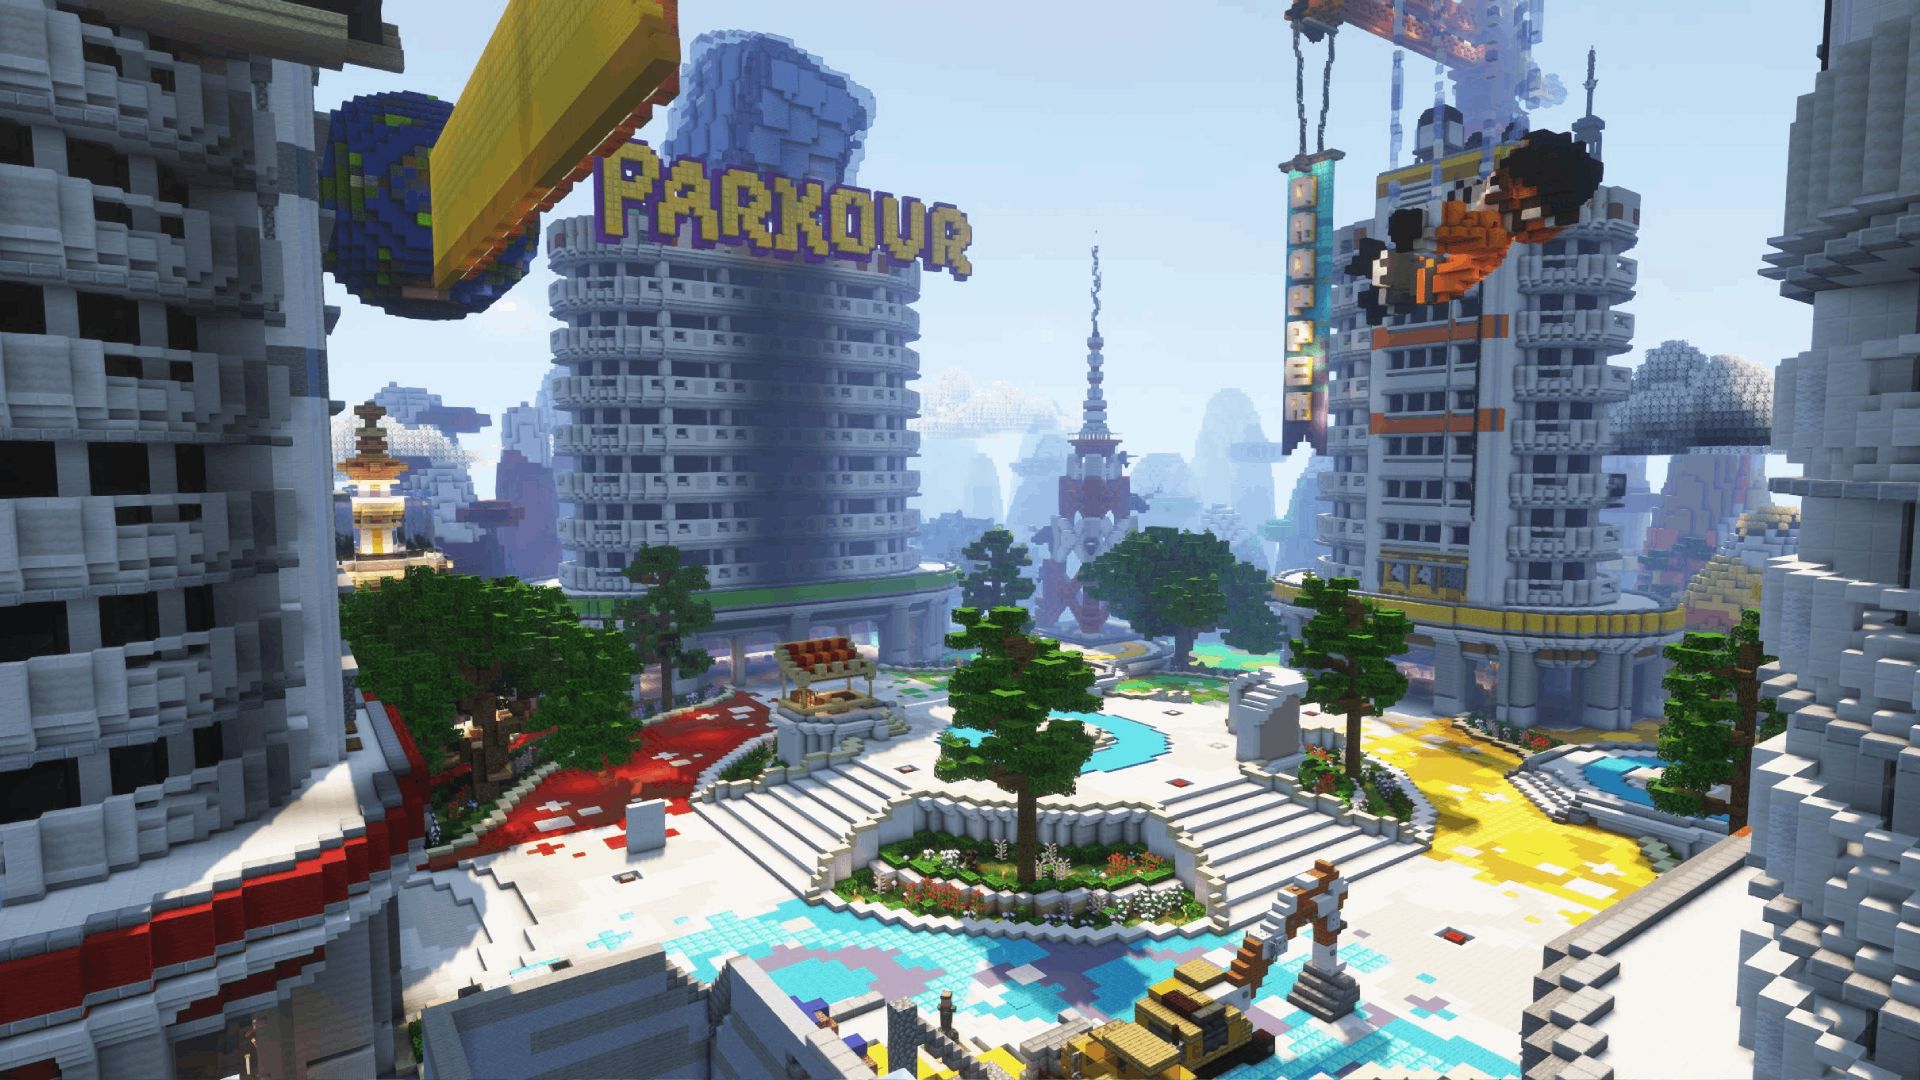 Parkour realm, home to 2500+ maps